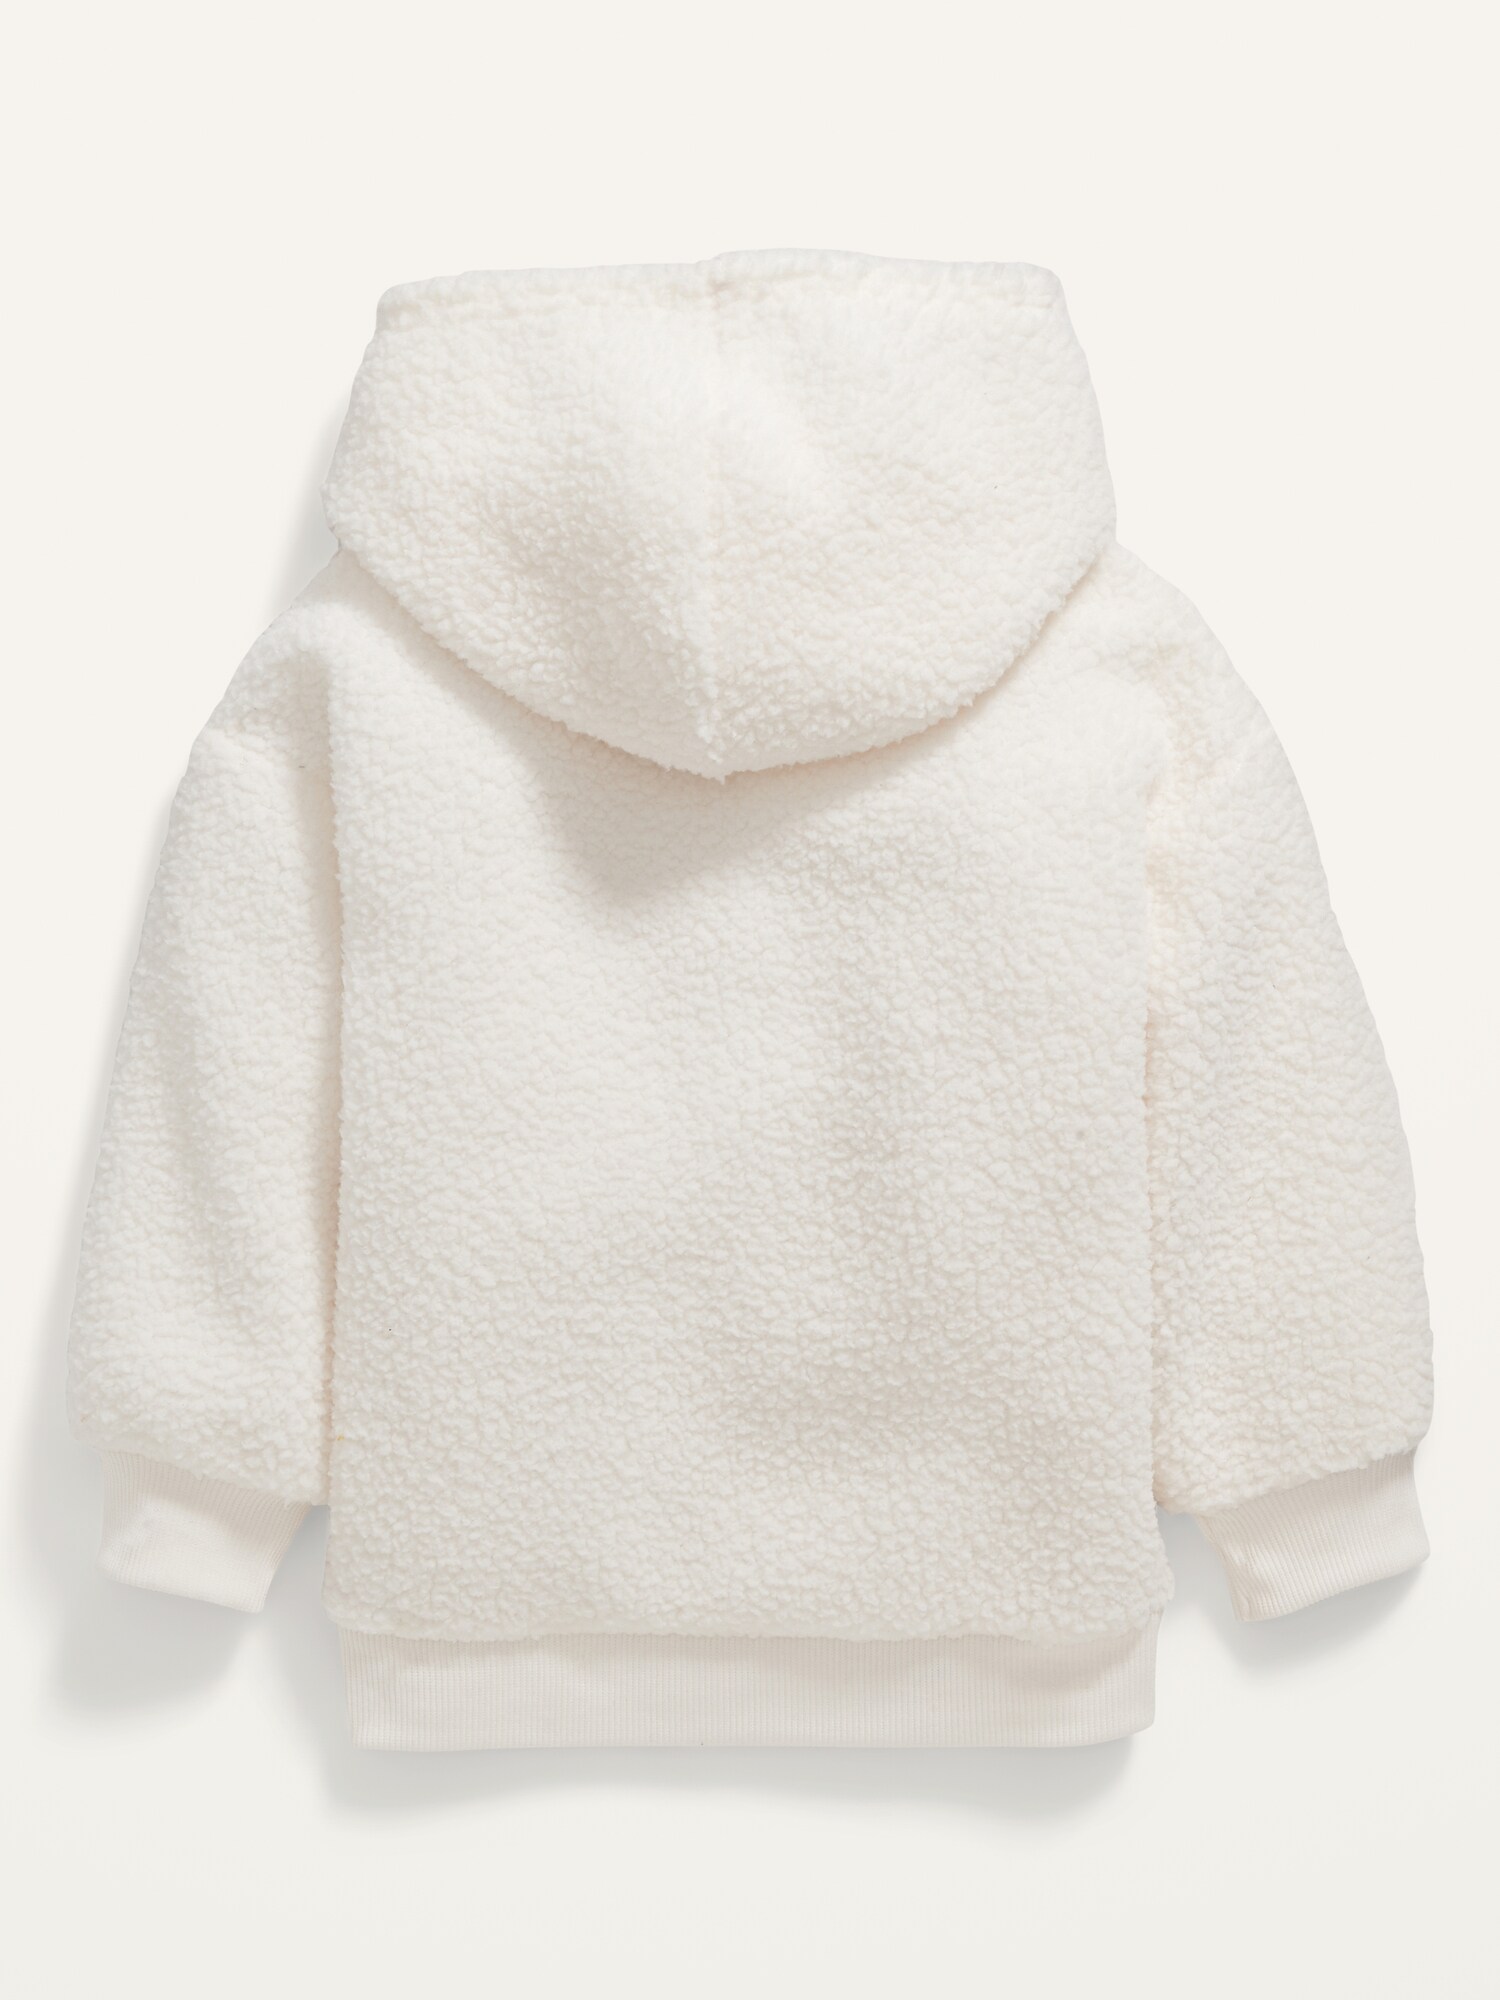 Unisex Sherpa Hoodie for Toddler | Old Navy